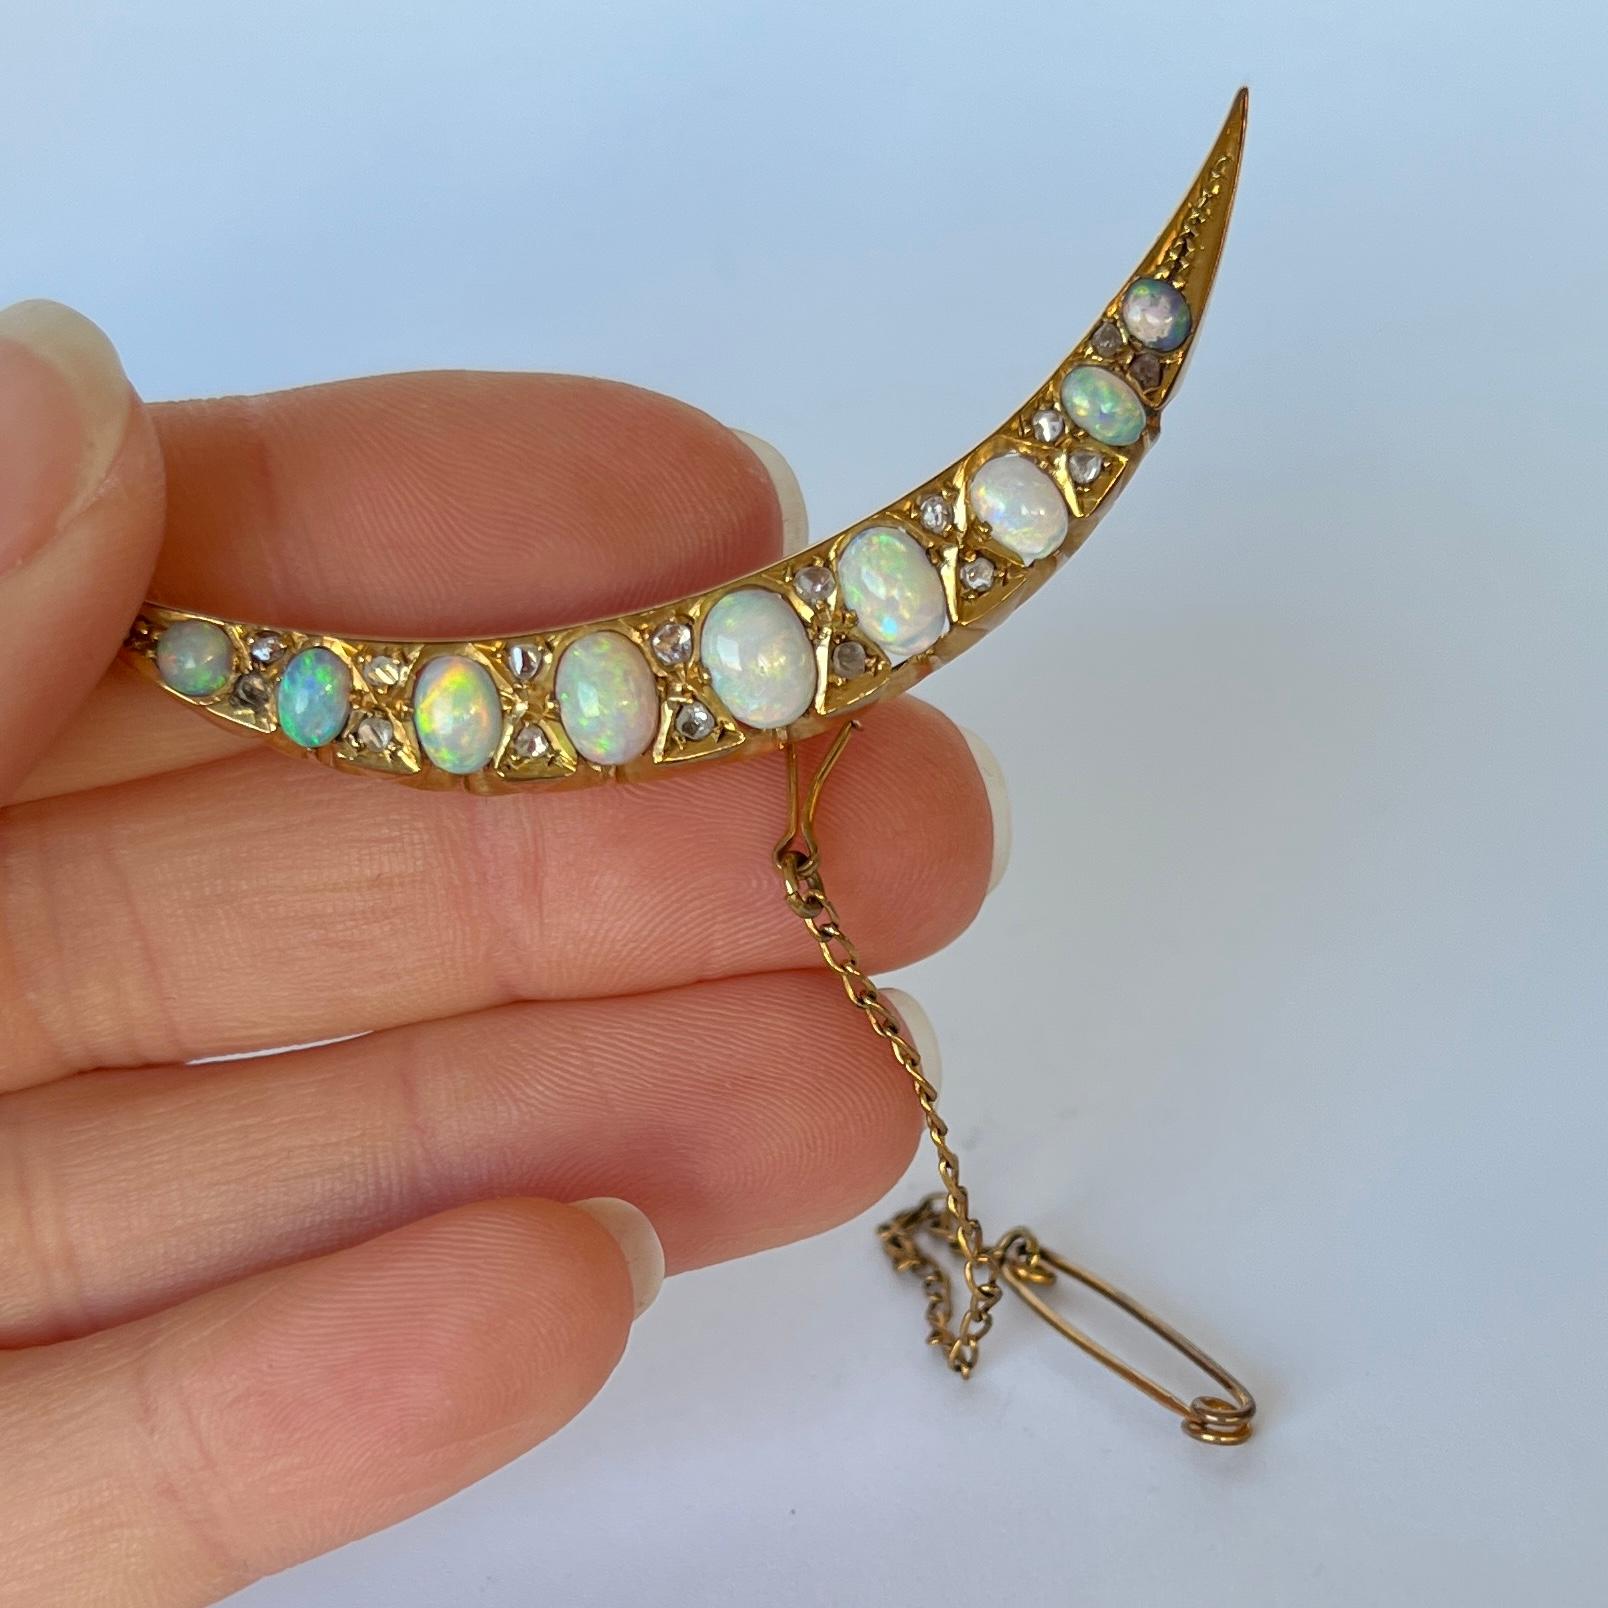 This exquisite brooch is set with 9 glowing opals. They have flashes of fiery red and so any other wonderful colours. In-between each opal there are a pair of sparking diamonds. Modelled in 15ct gold. 

Length: 58mm

Weight: 6.1g